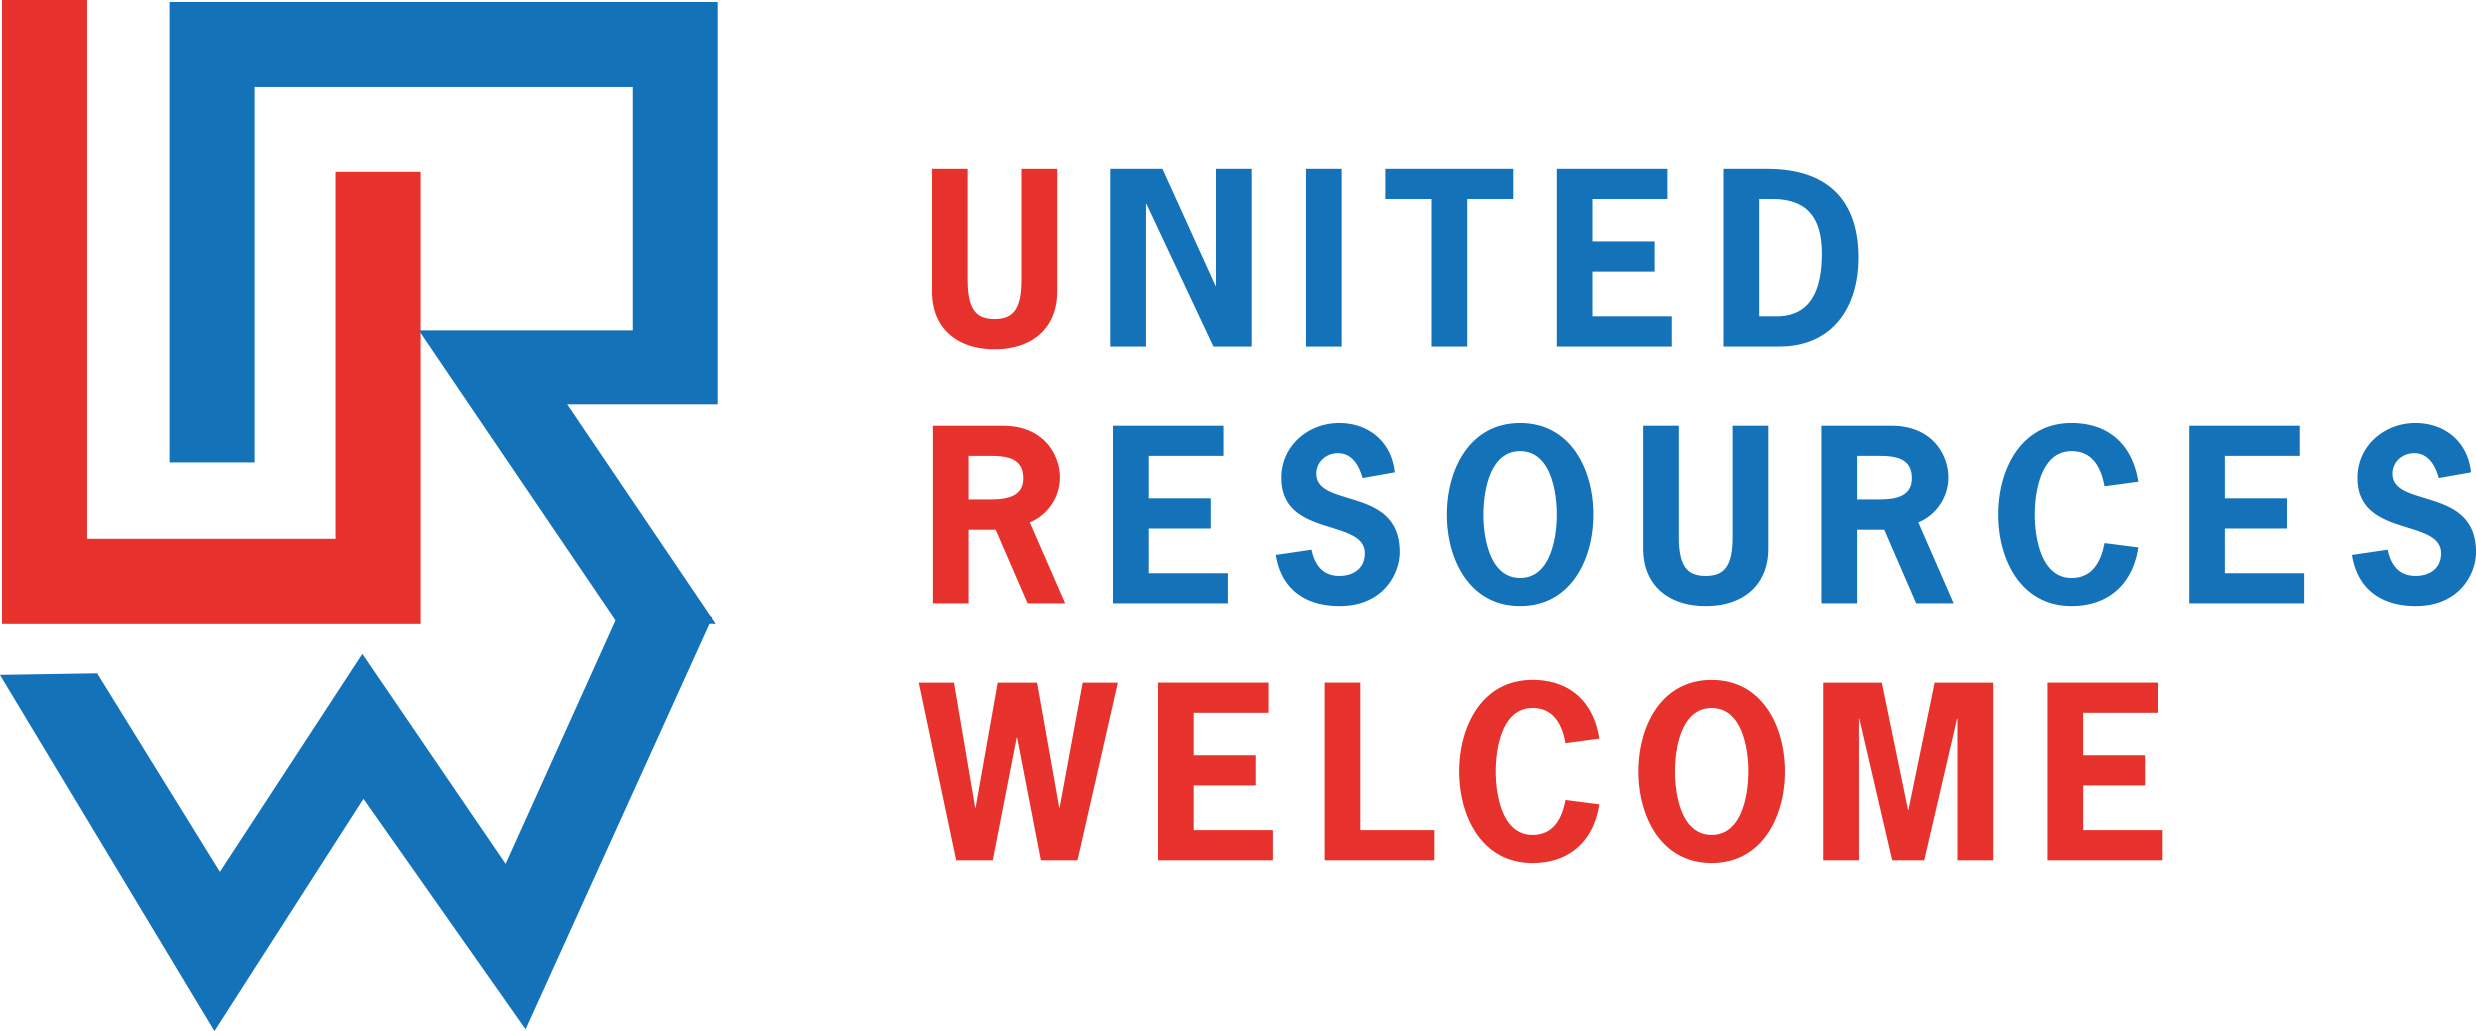 URW UNITED RESOURCES WELCOME